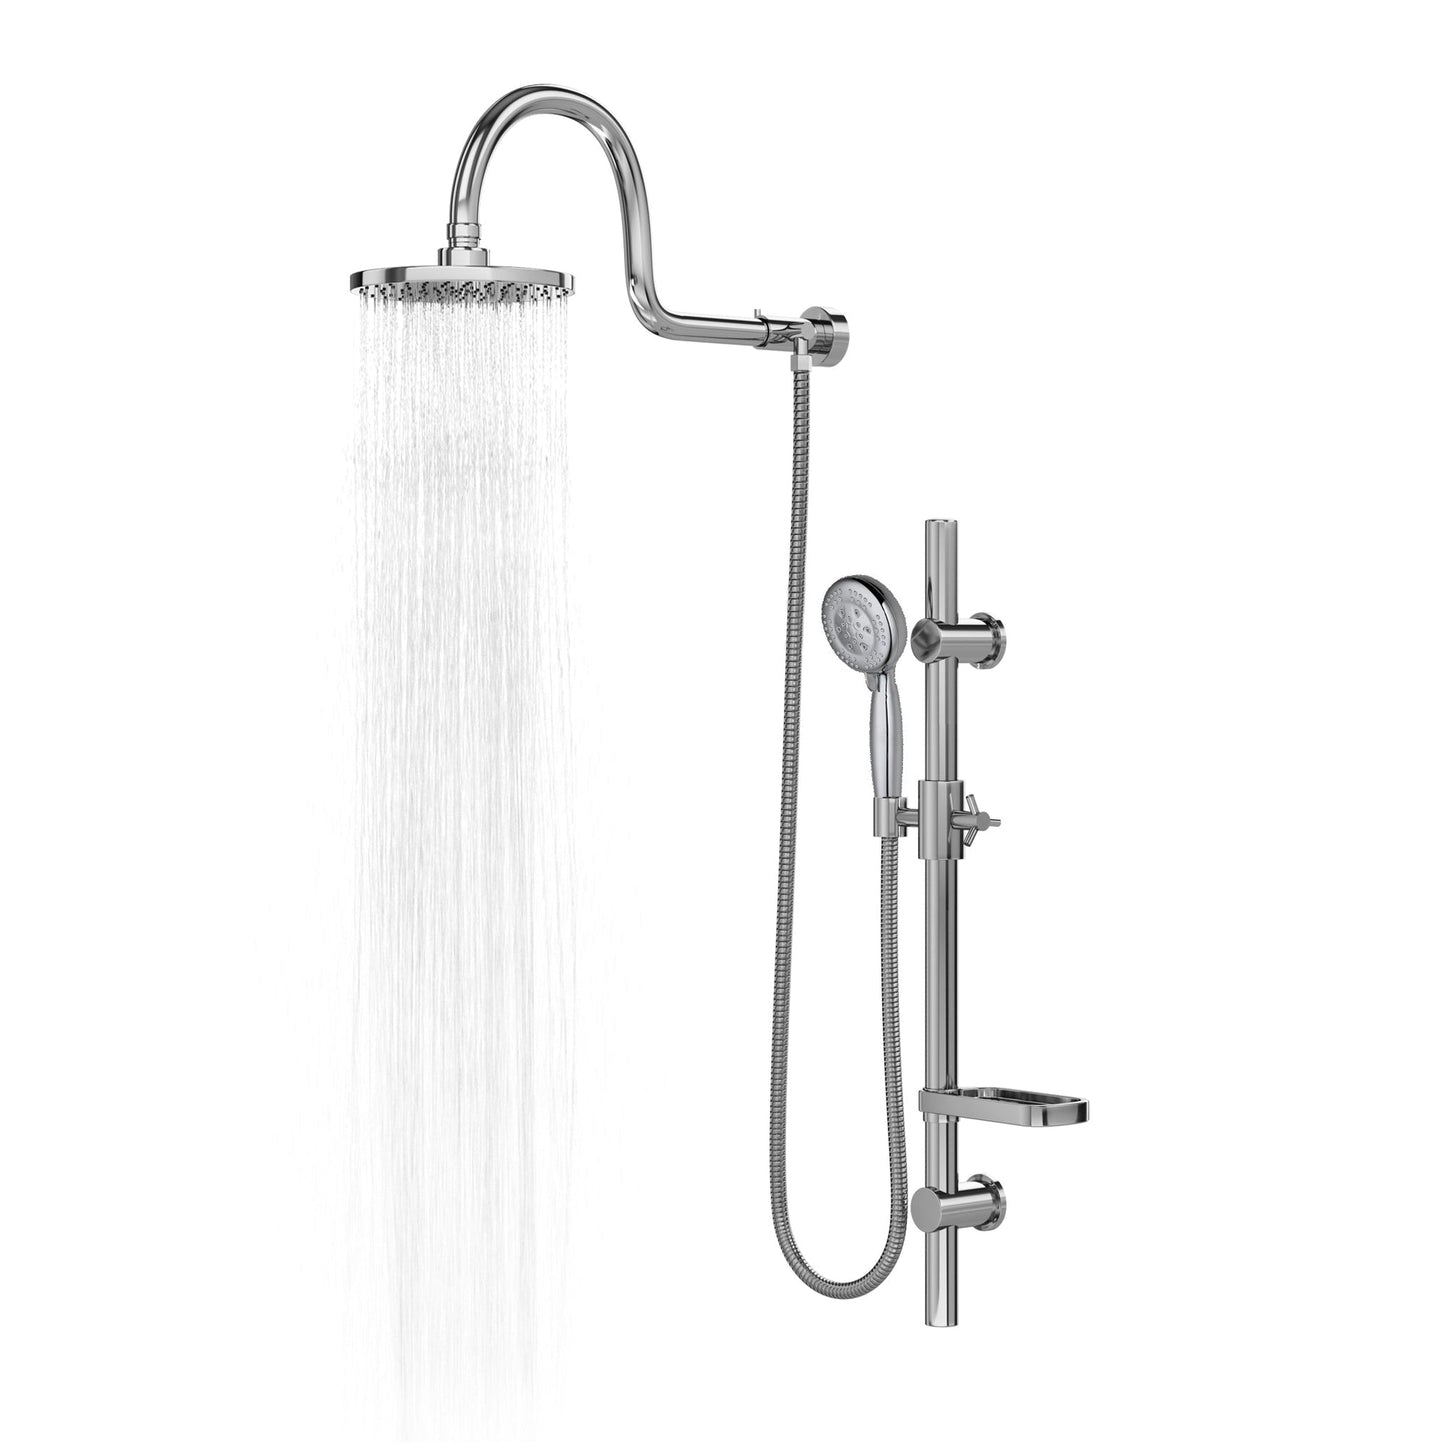 PULSE ShowerSpas AquaRain 2.5 GPM Shower System in Chrome Finish With Rain Shower Head and 5-Function Handheld Shower